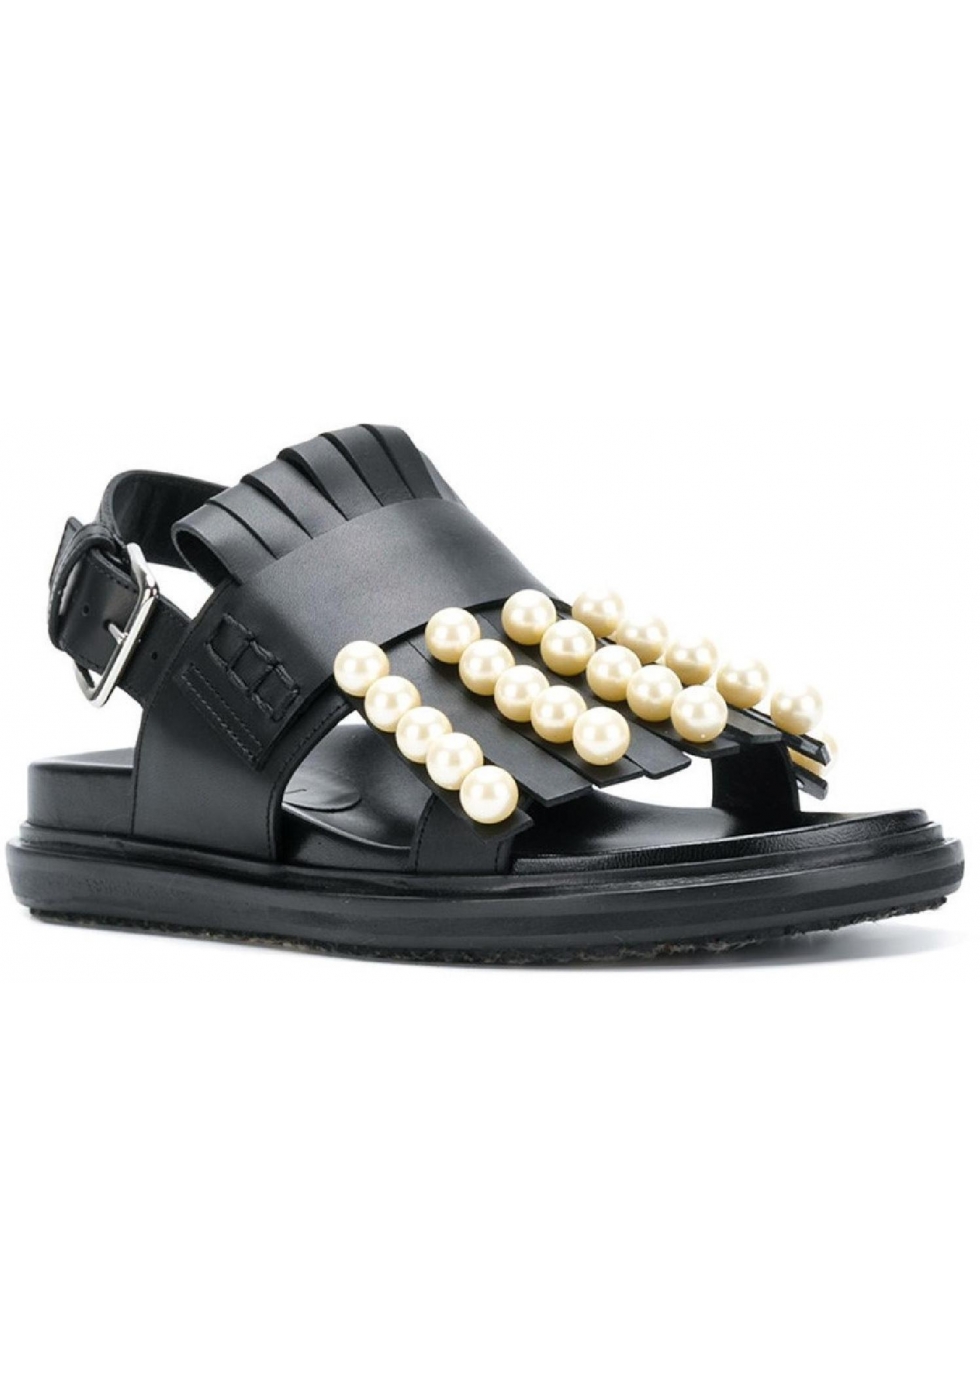 Marni flat slingback sandals in black leather with pearls - Italian ...